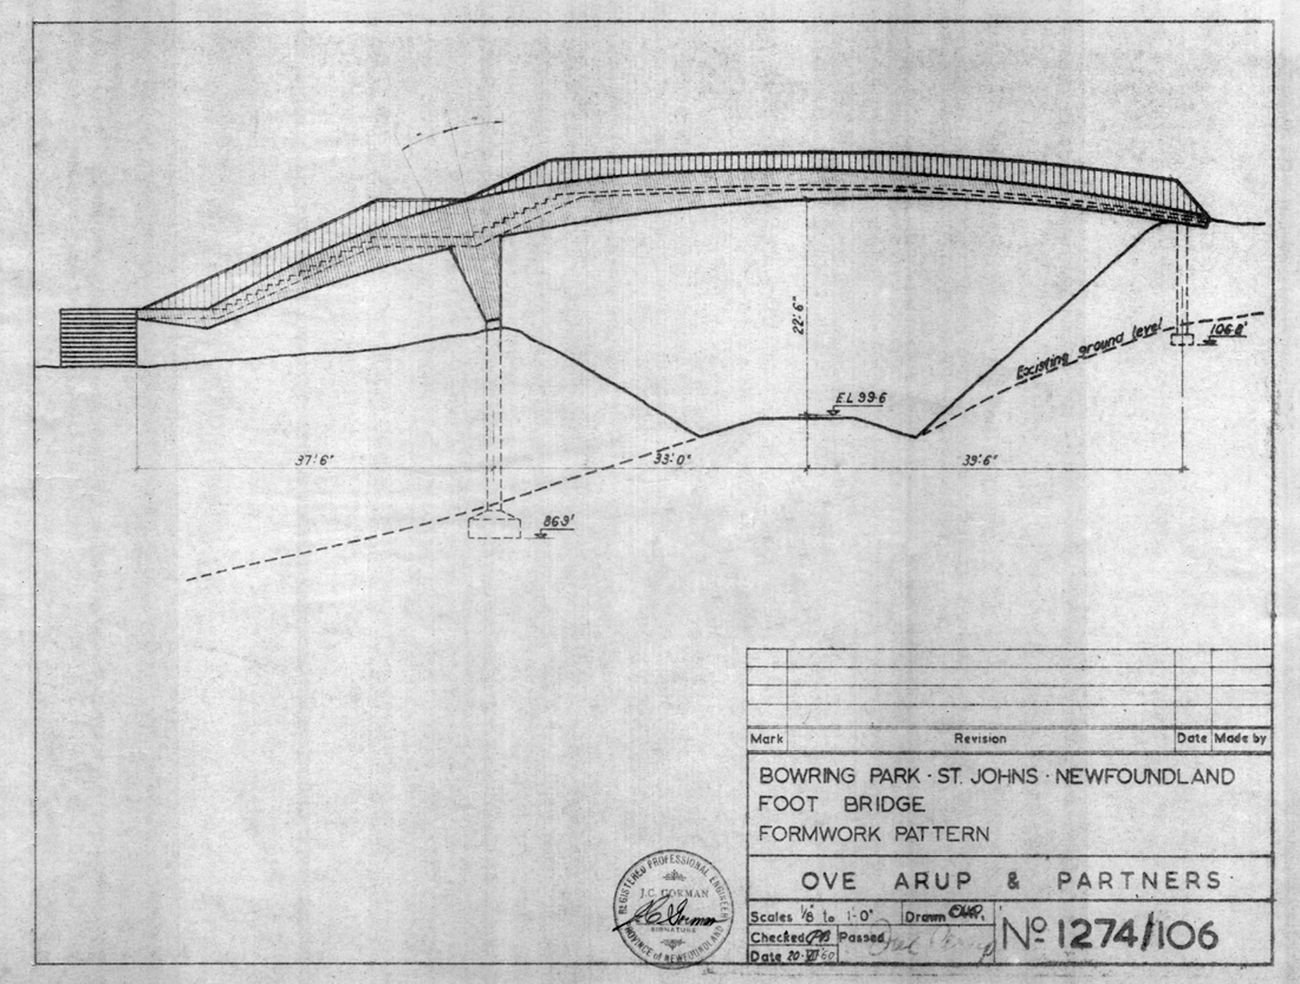 Van Ginkel Associates and Ove Arup & Partners, disegno per il ponte pedonale in Bowring Park, St. John’s, Newfoundland, Canada, 1959. City of St. John's Archives